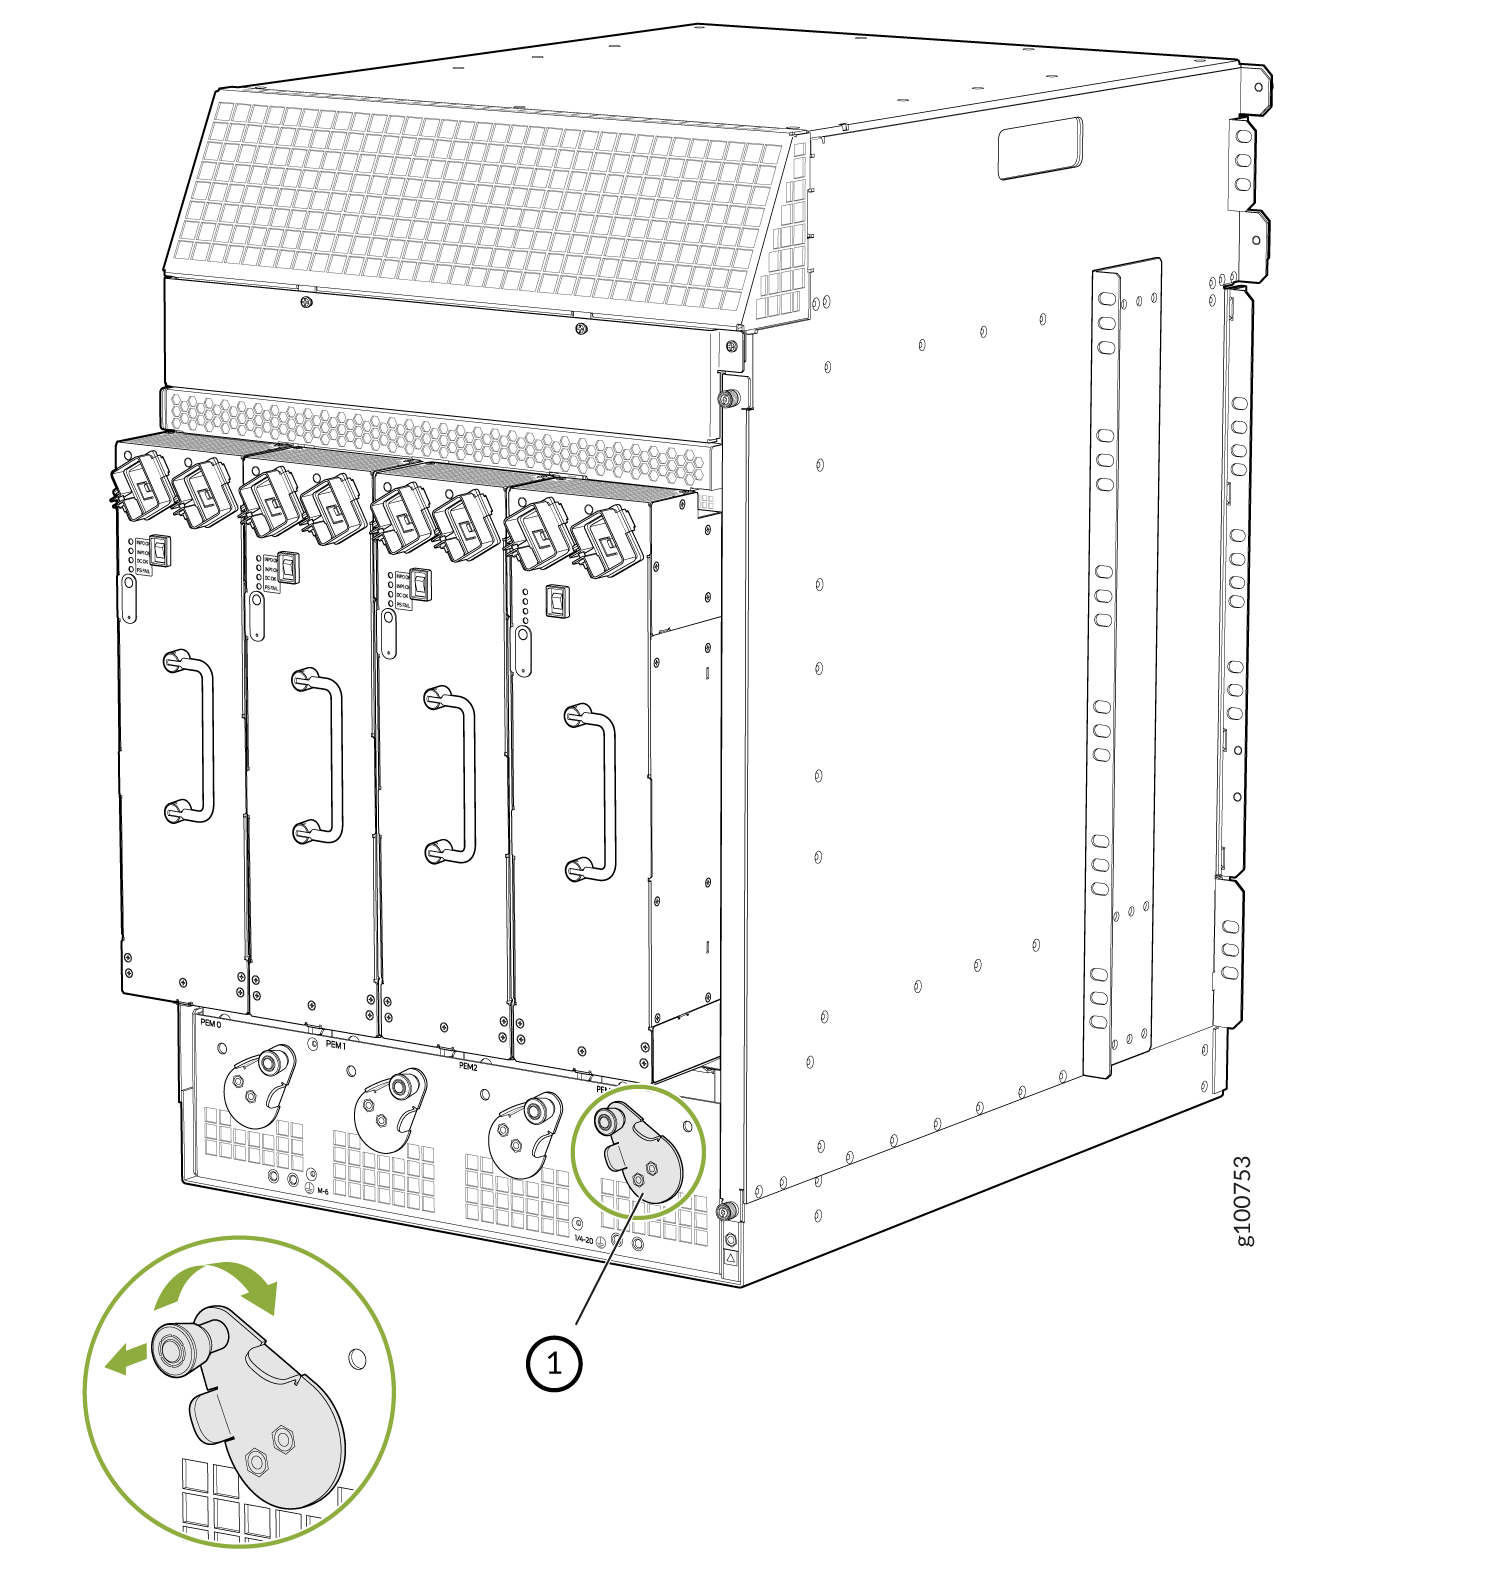 SRX5800 Services Gateway with High-Capacity Second Generation AC Power Supplies Installed